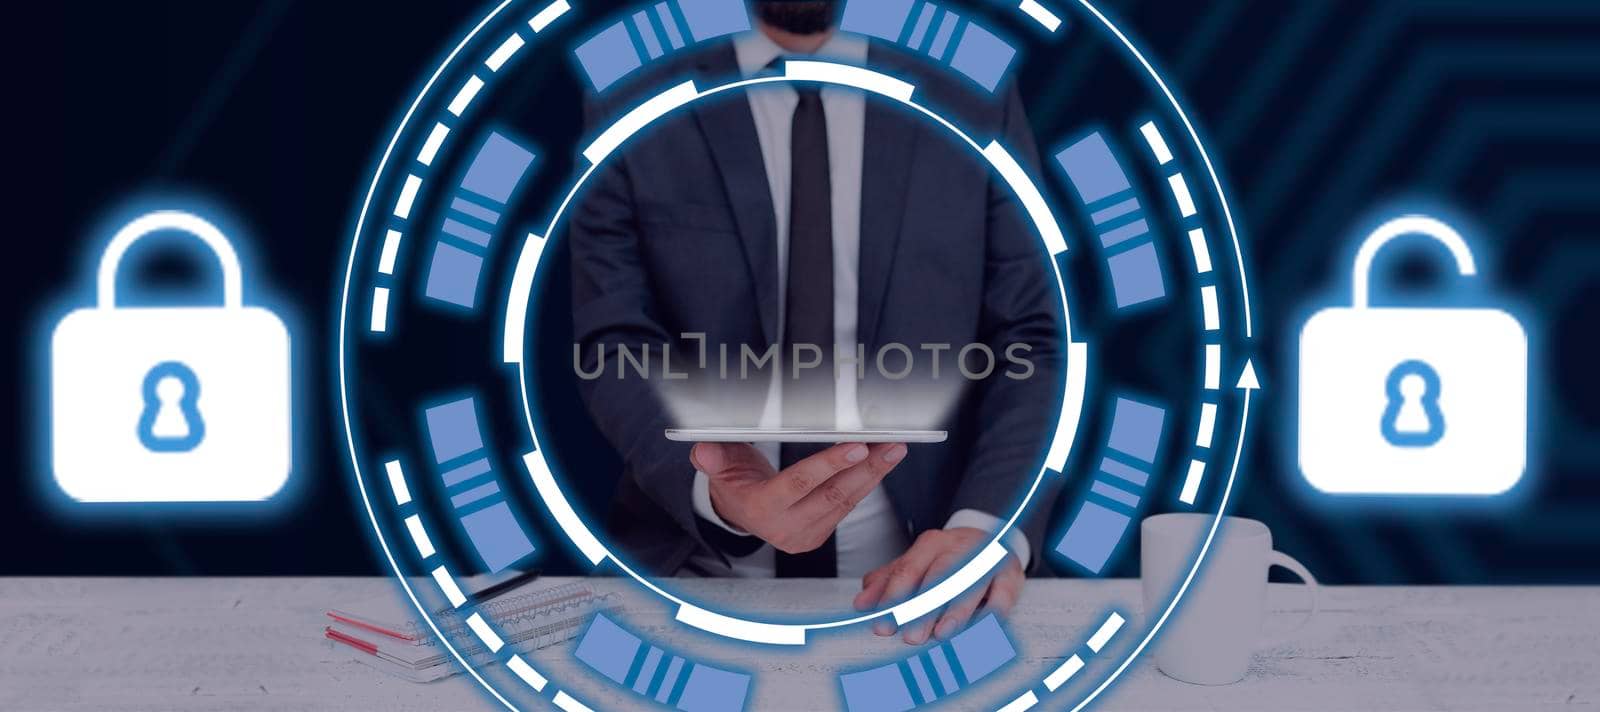 Businessman Holding A Tablet With Lock And Unlock S In A Glowing Futuristic Frame. Man In A Suit With A Touch Screen Showing A Secured Network With Encrypted Information. by nialowwa